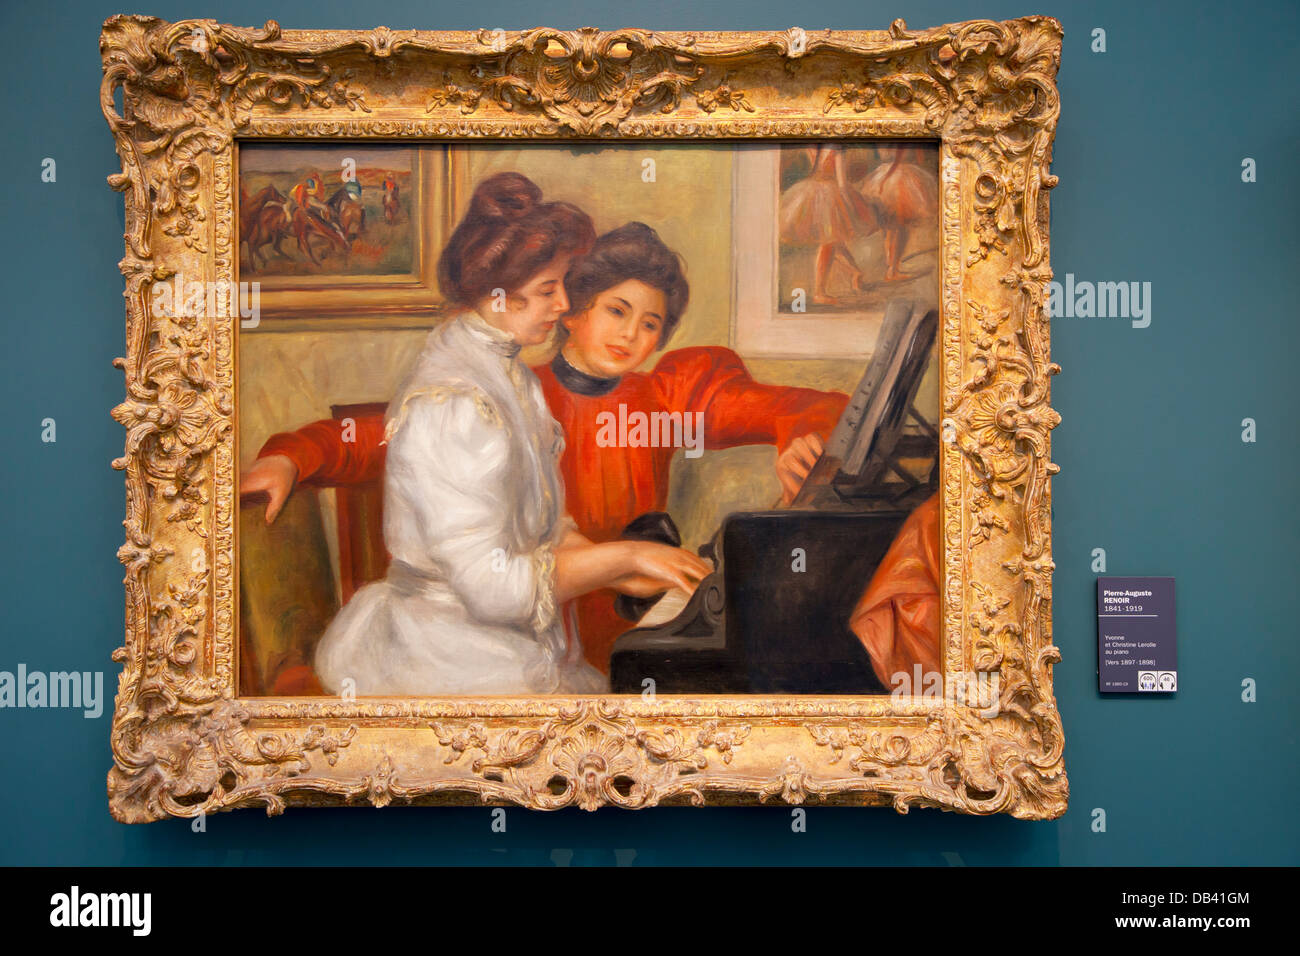 Yvonne et Christine Lerolle au Piano, painting by Renoir on display at Musee l'Orangerie, Paris France Stock Photo